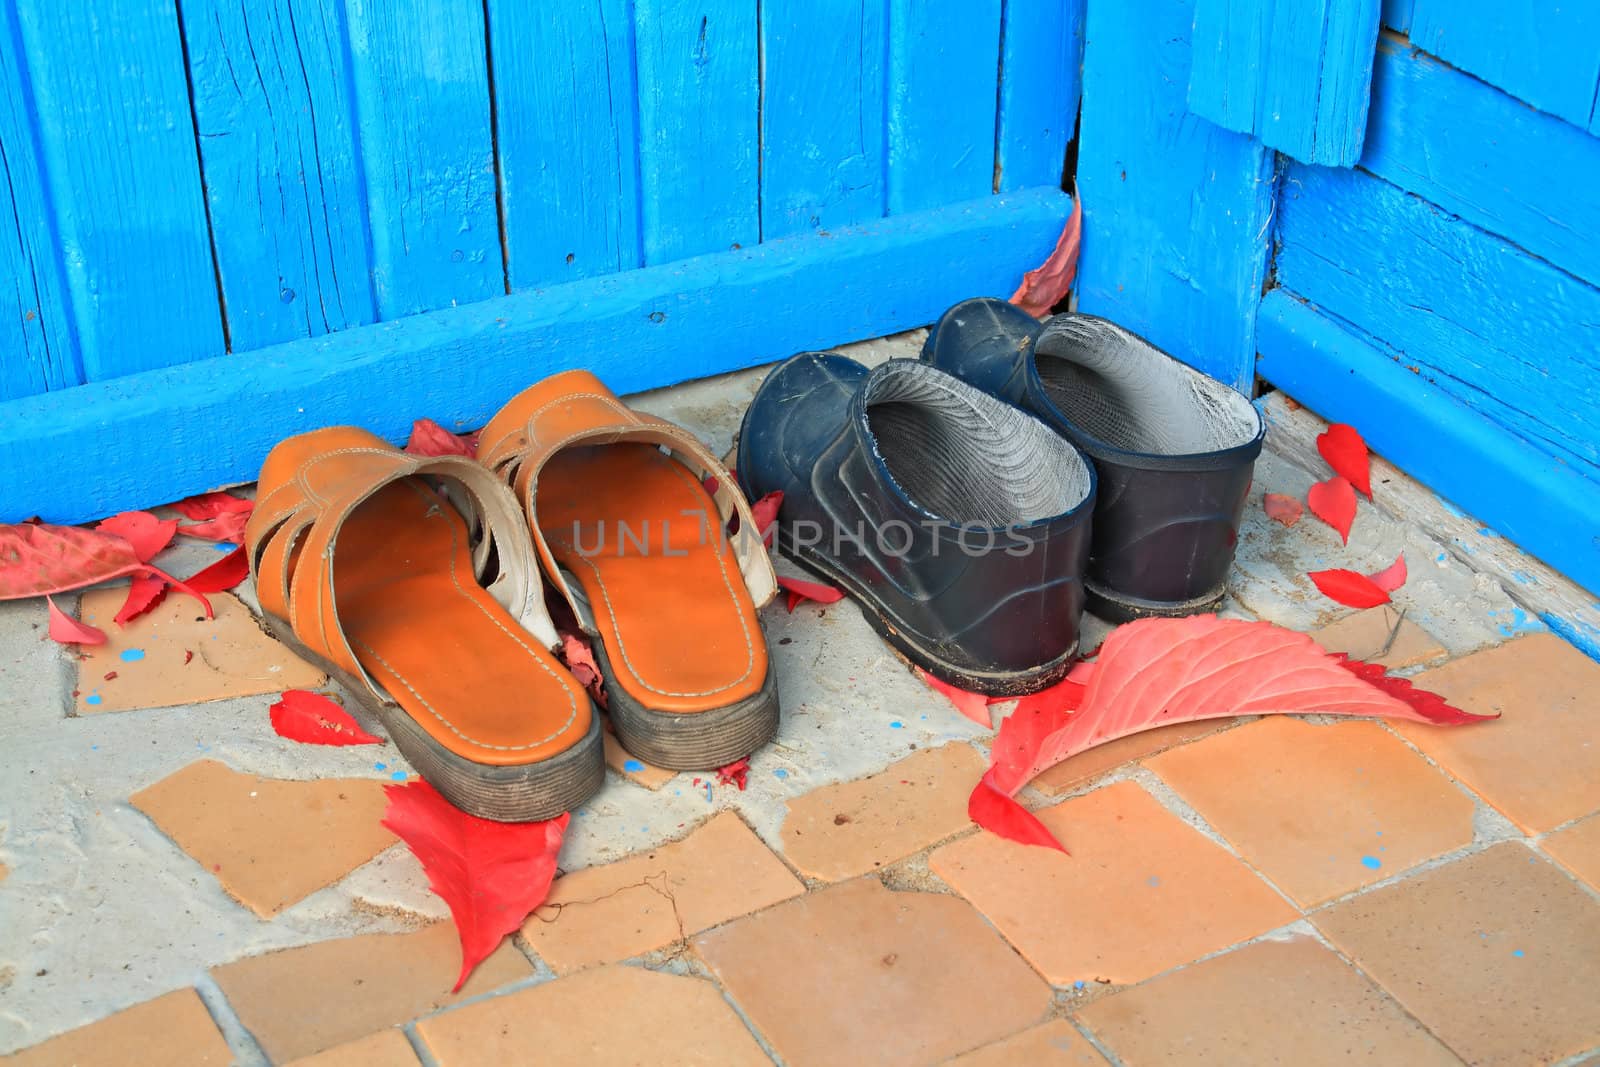 aging footwear on porch of the rural building